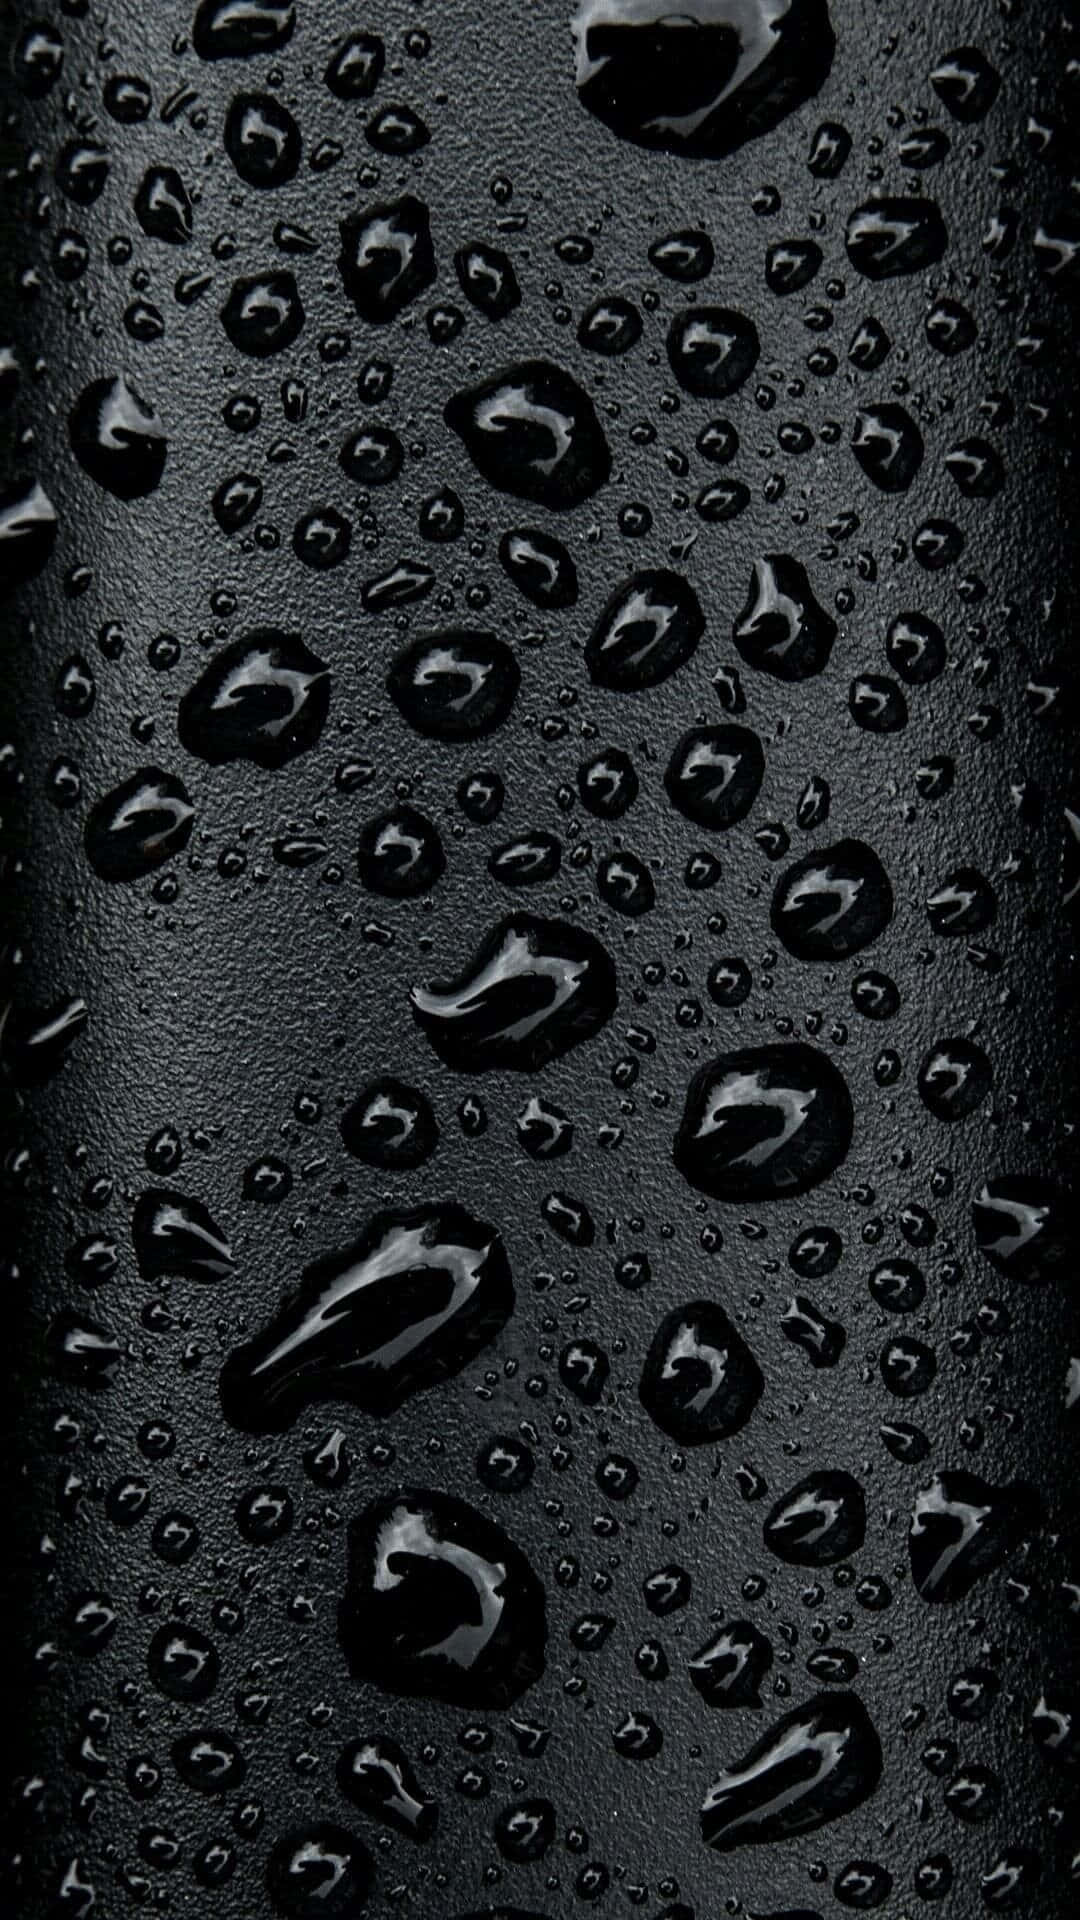 Get the Dark Look with the iPhone Wallpaper